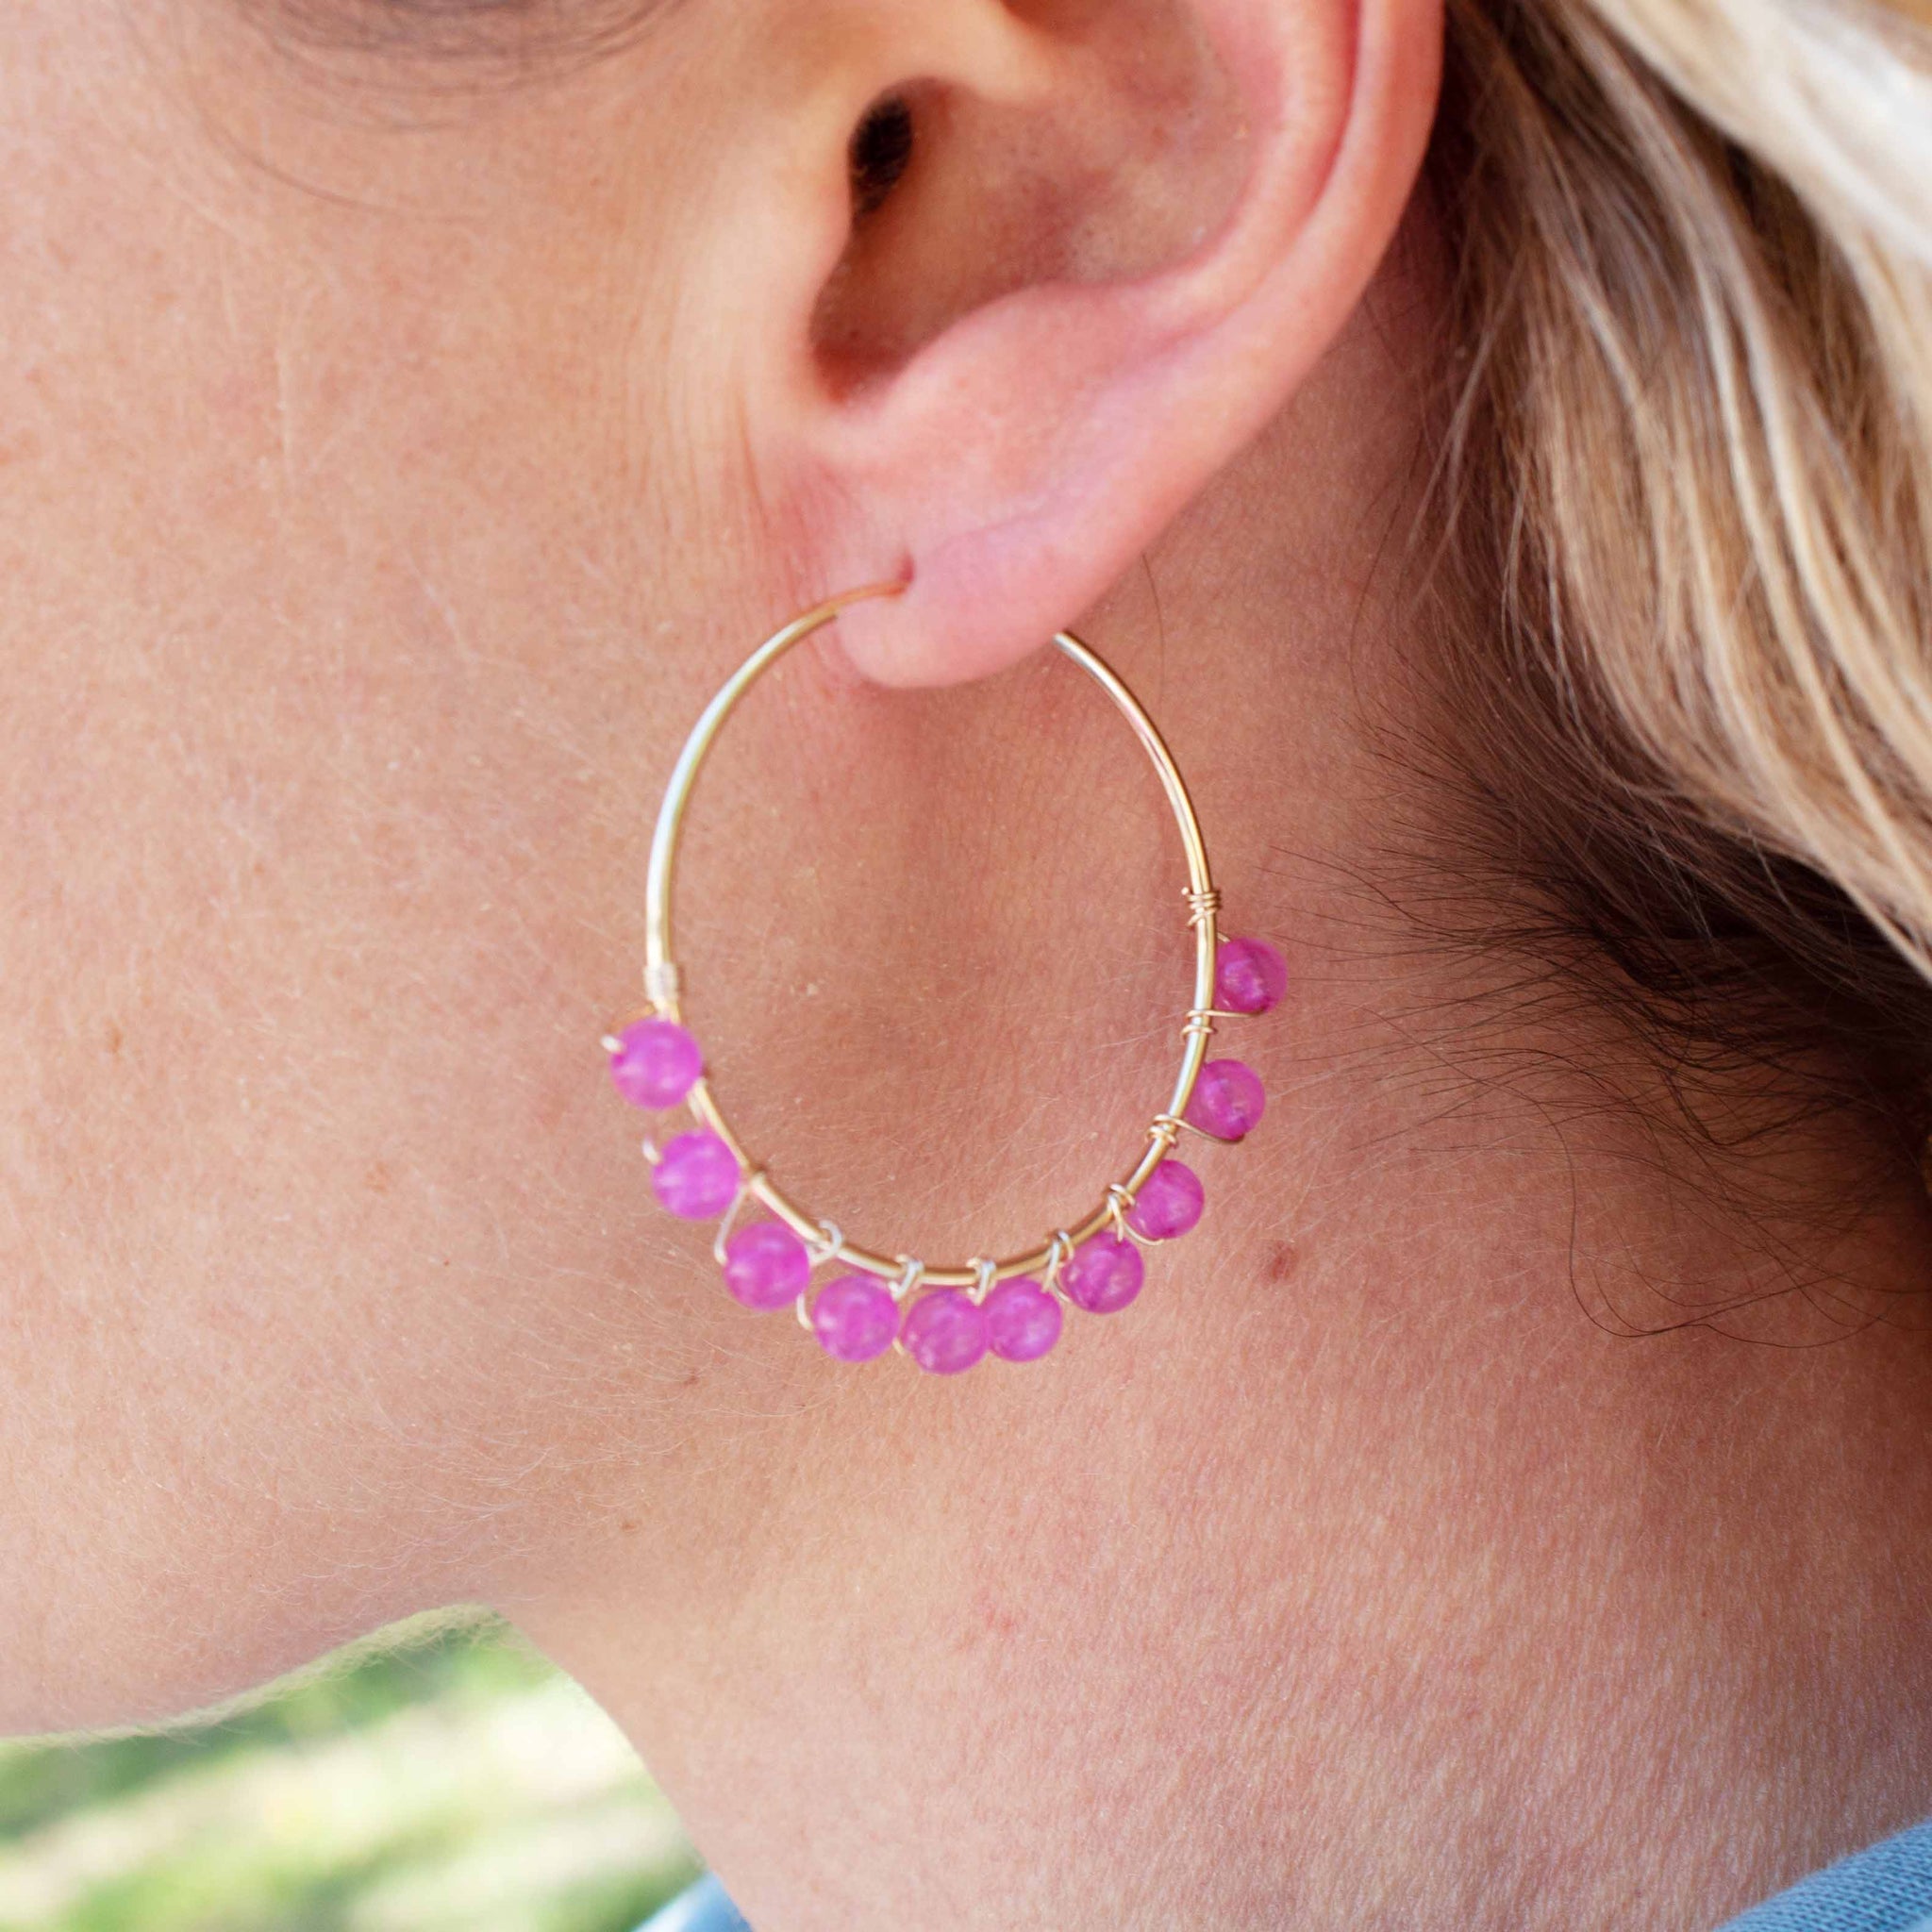 Bodacious ear candy to crank up your Zoom calls this summer!  40mm gold filled hoop earrings and fuchsia beads wrapped with gold wire handmade in Toronto kp jewelry co.